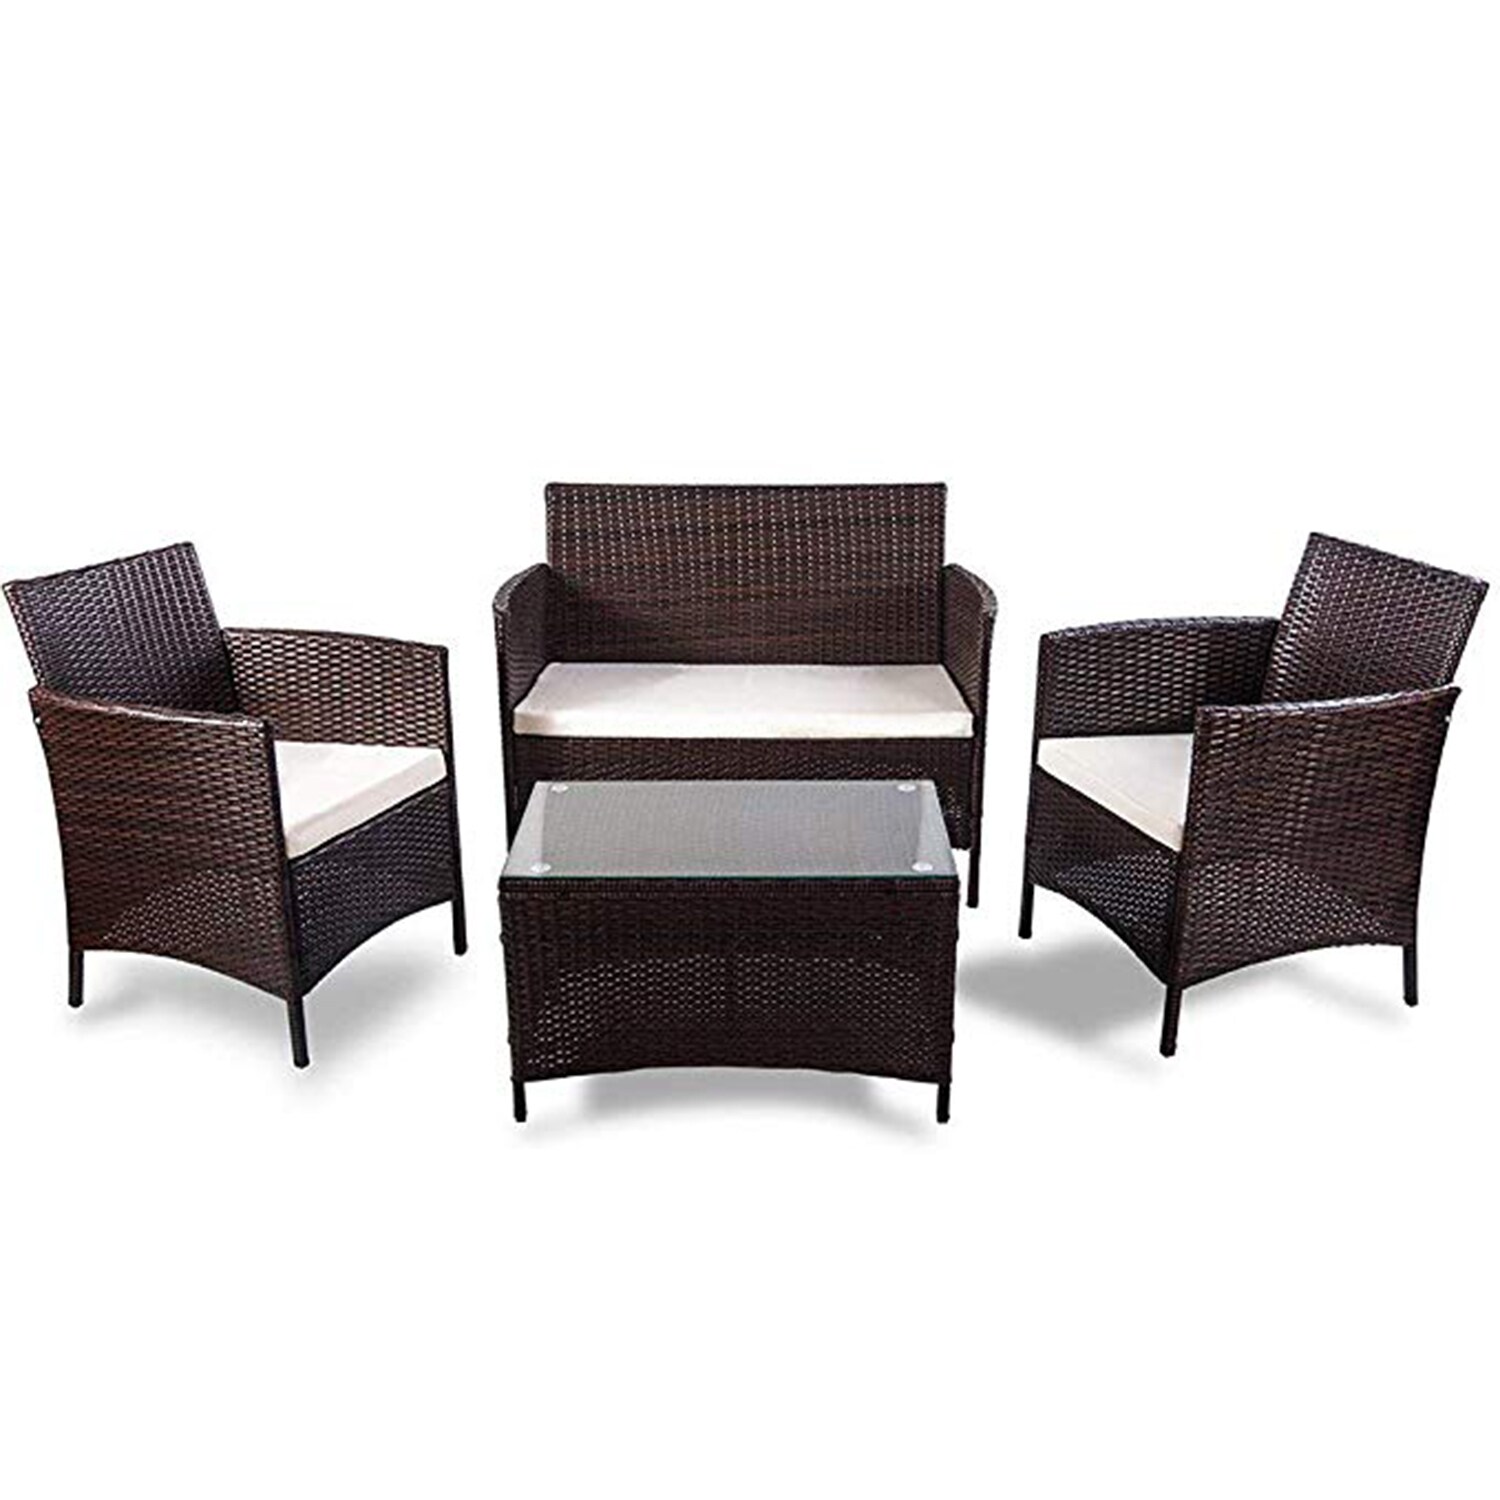 Coffee Table & Beige Cushions Merax Patio Furniture Set 4 Pieces Outdoor Conversation Set with Wicker Sofa Rattan Chairs Brown 